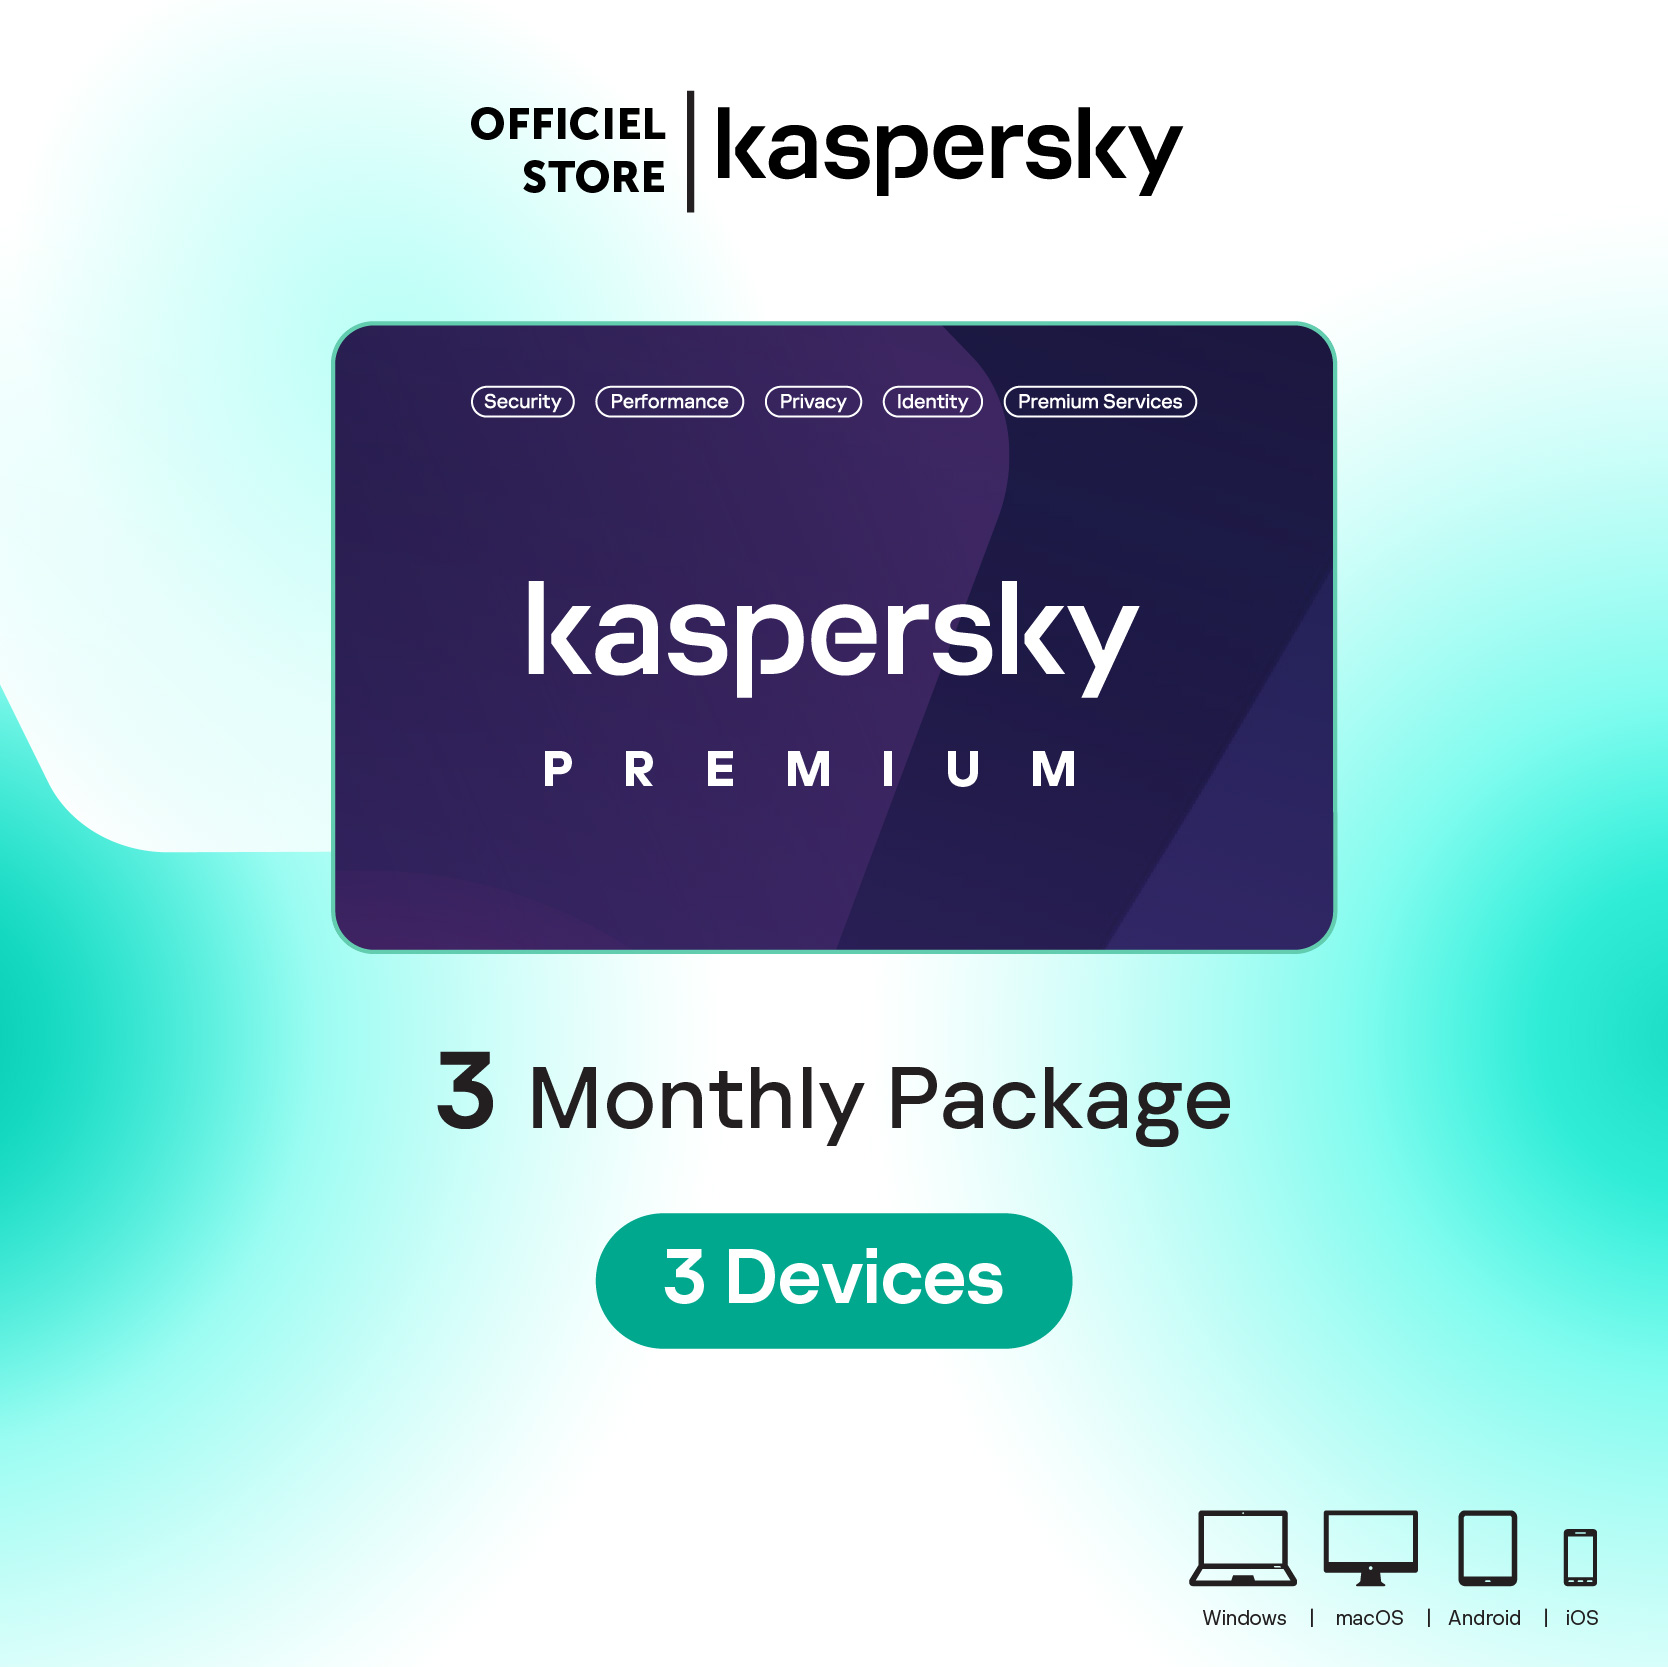 Kaspersky Premium 3 Devices 3 Months